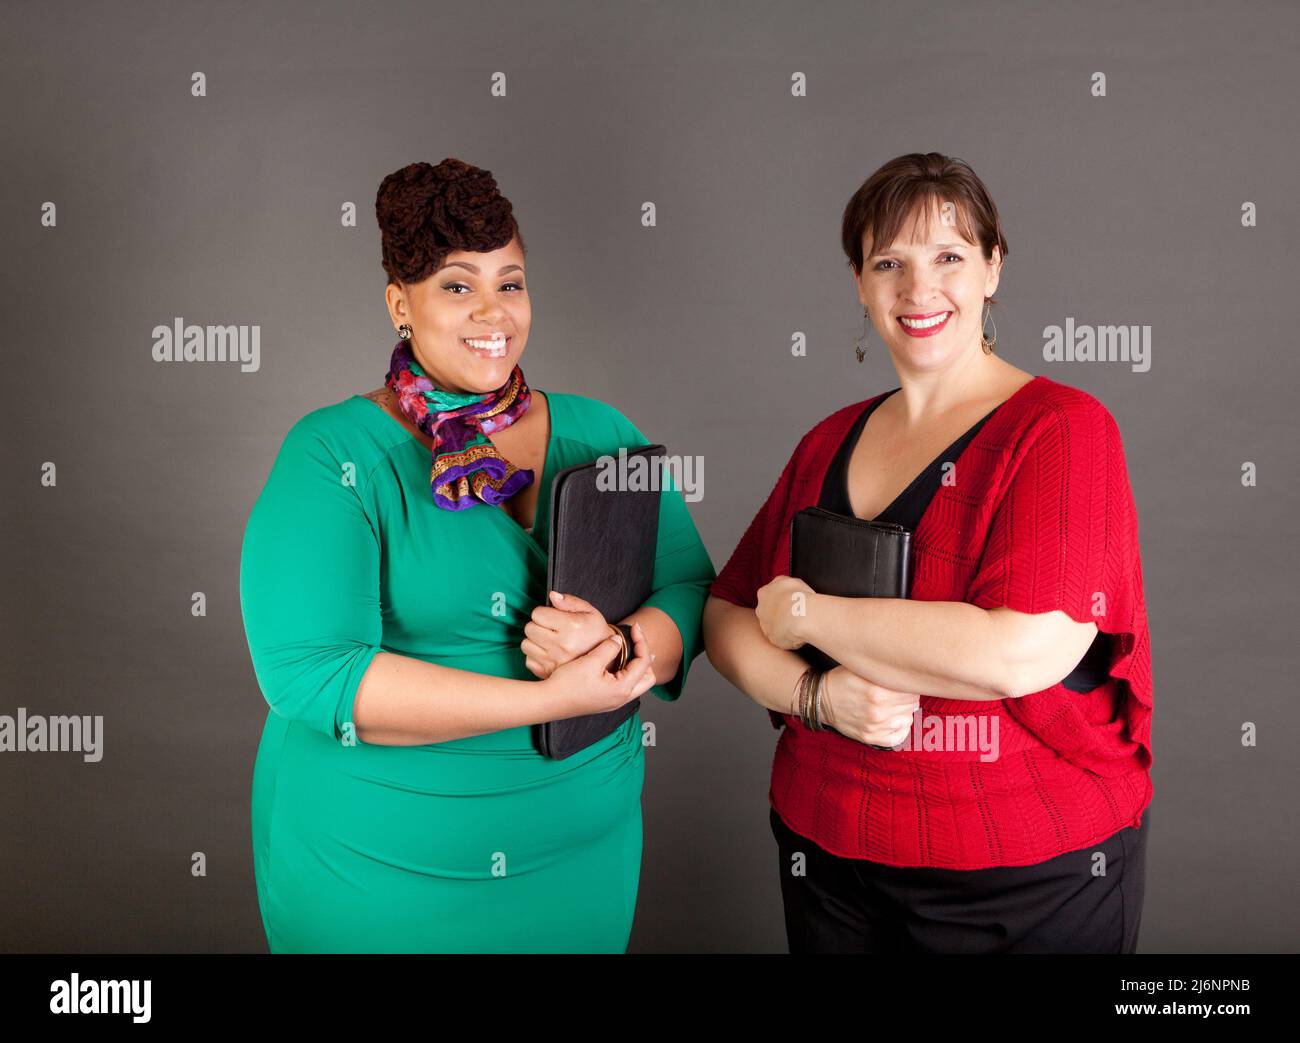 Happy, smiling plus size women of different races looking at the camera wearing bold colors holding traditional business portfolios Stock Photo